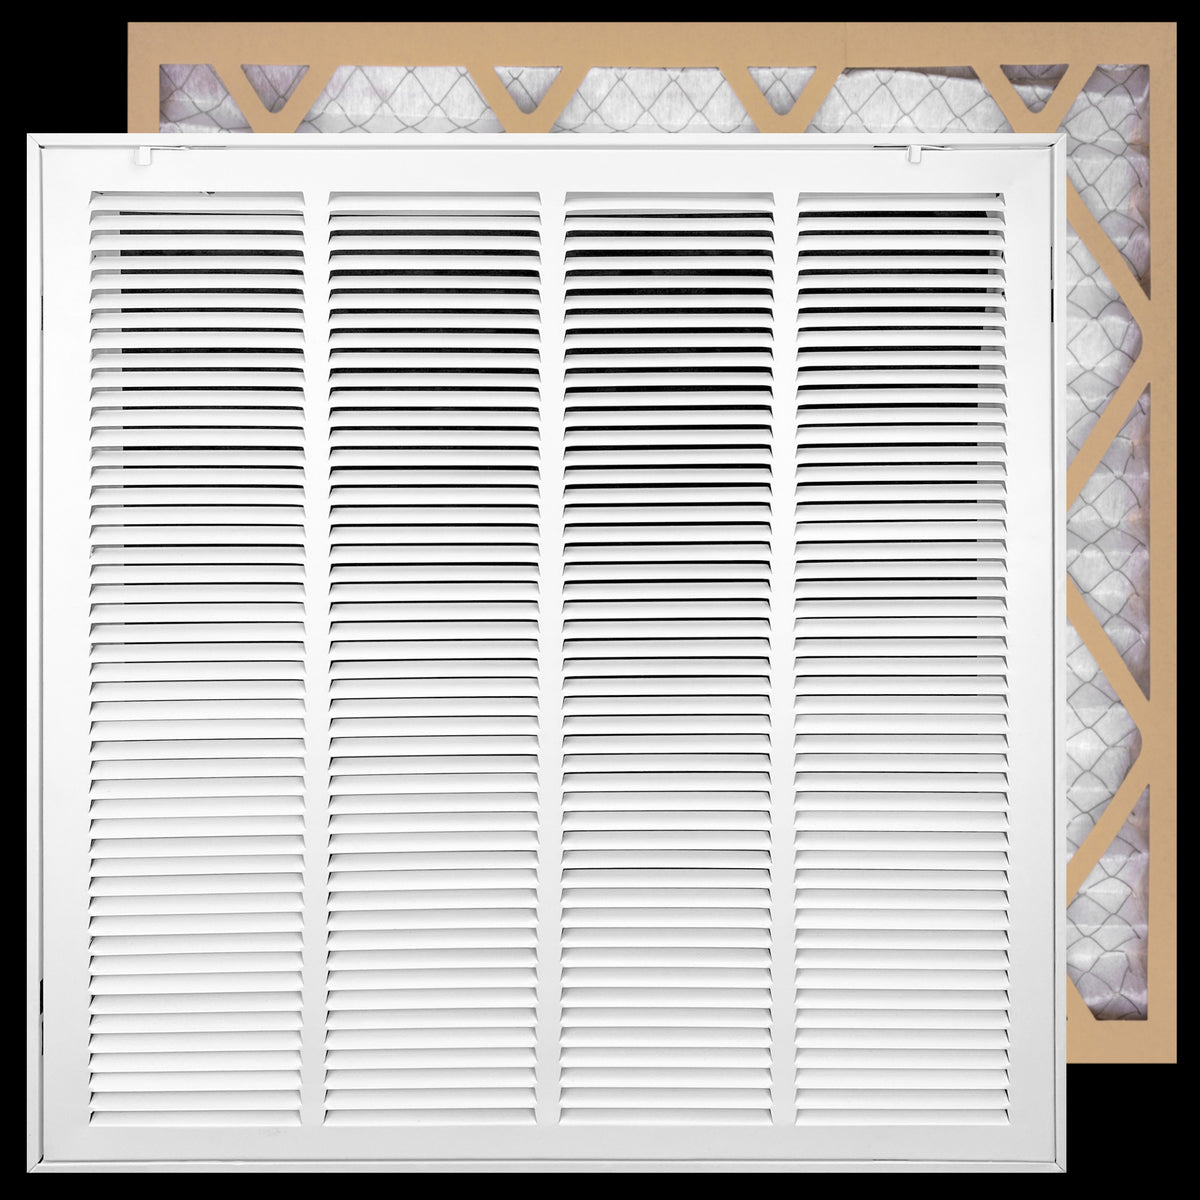 airgrilles 30" x 20" duct opening  filter included hd steel return air filter grille for sidewall and ceiling fil-7rafg1-wh-30x20 038775643979 1